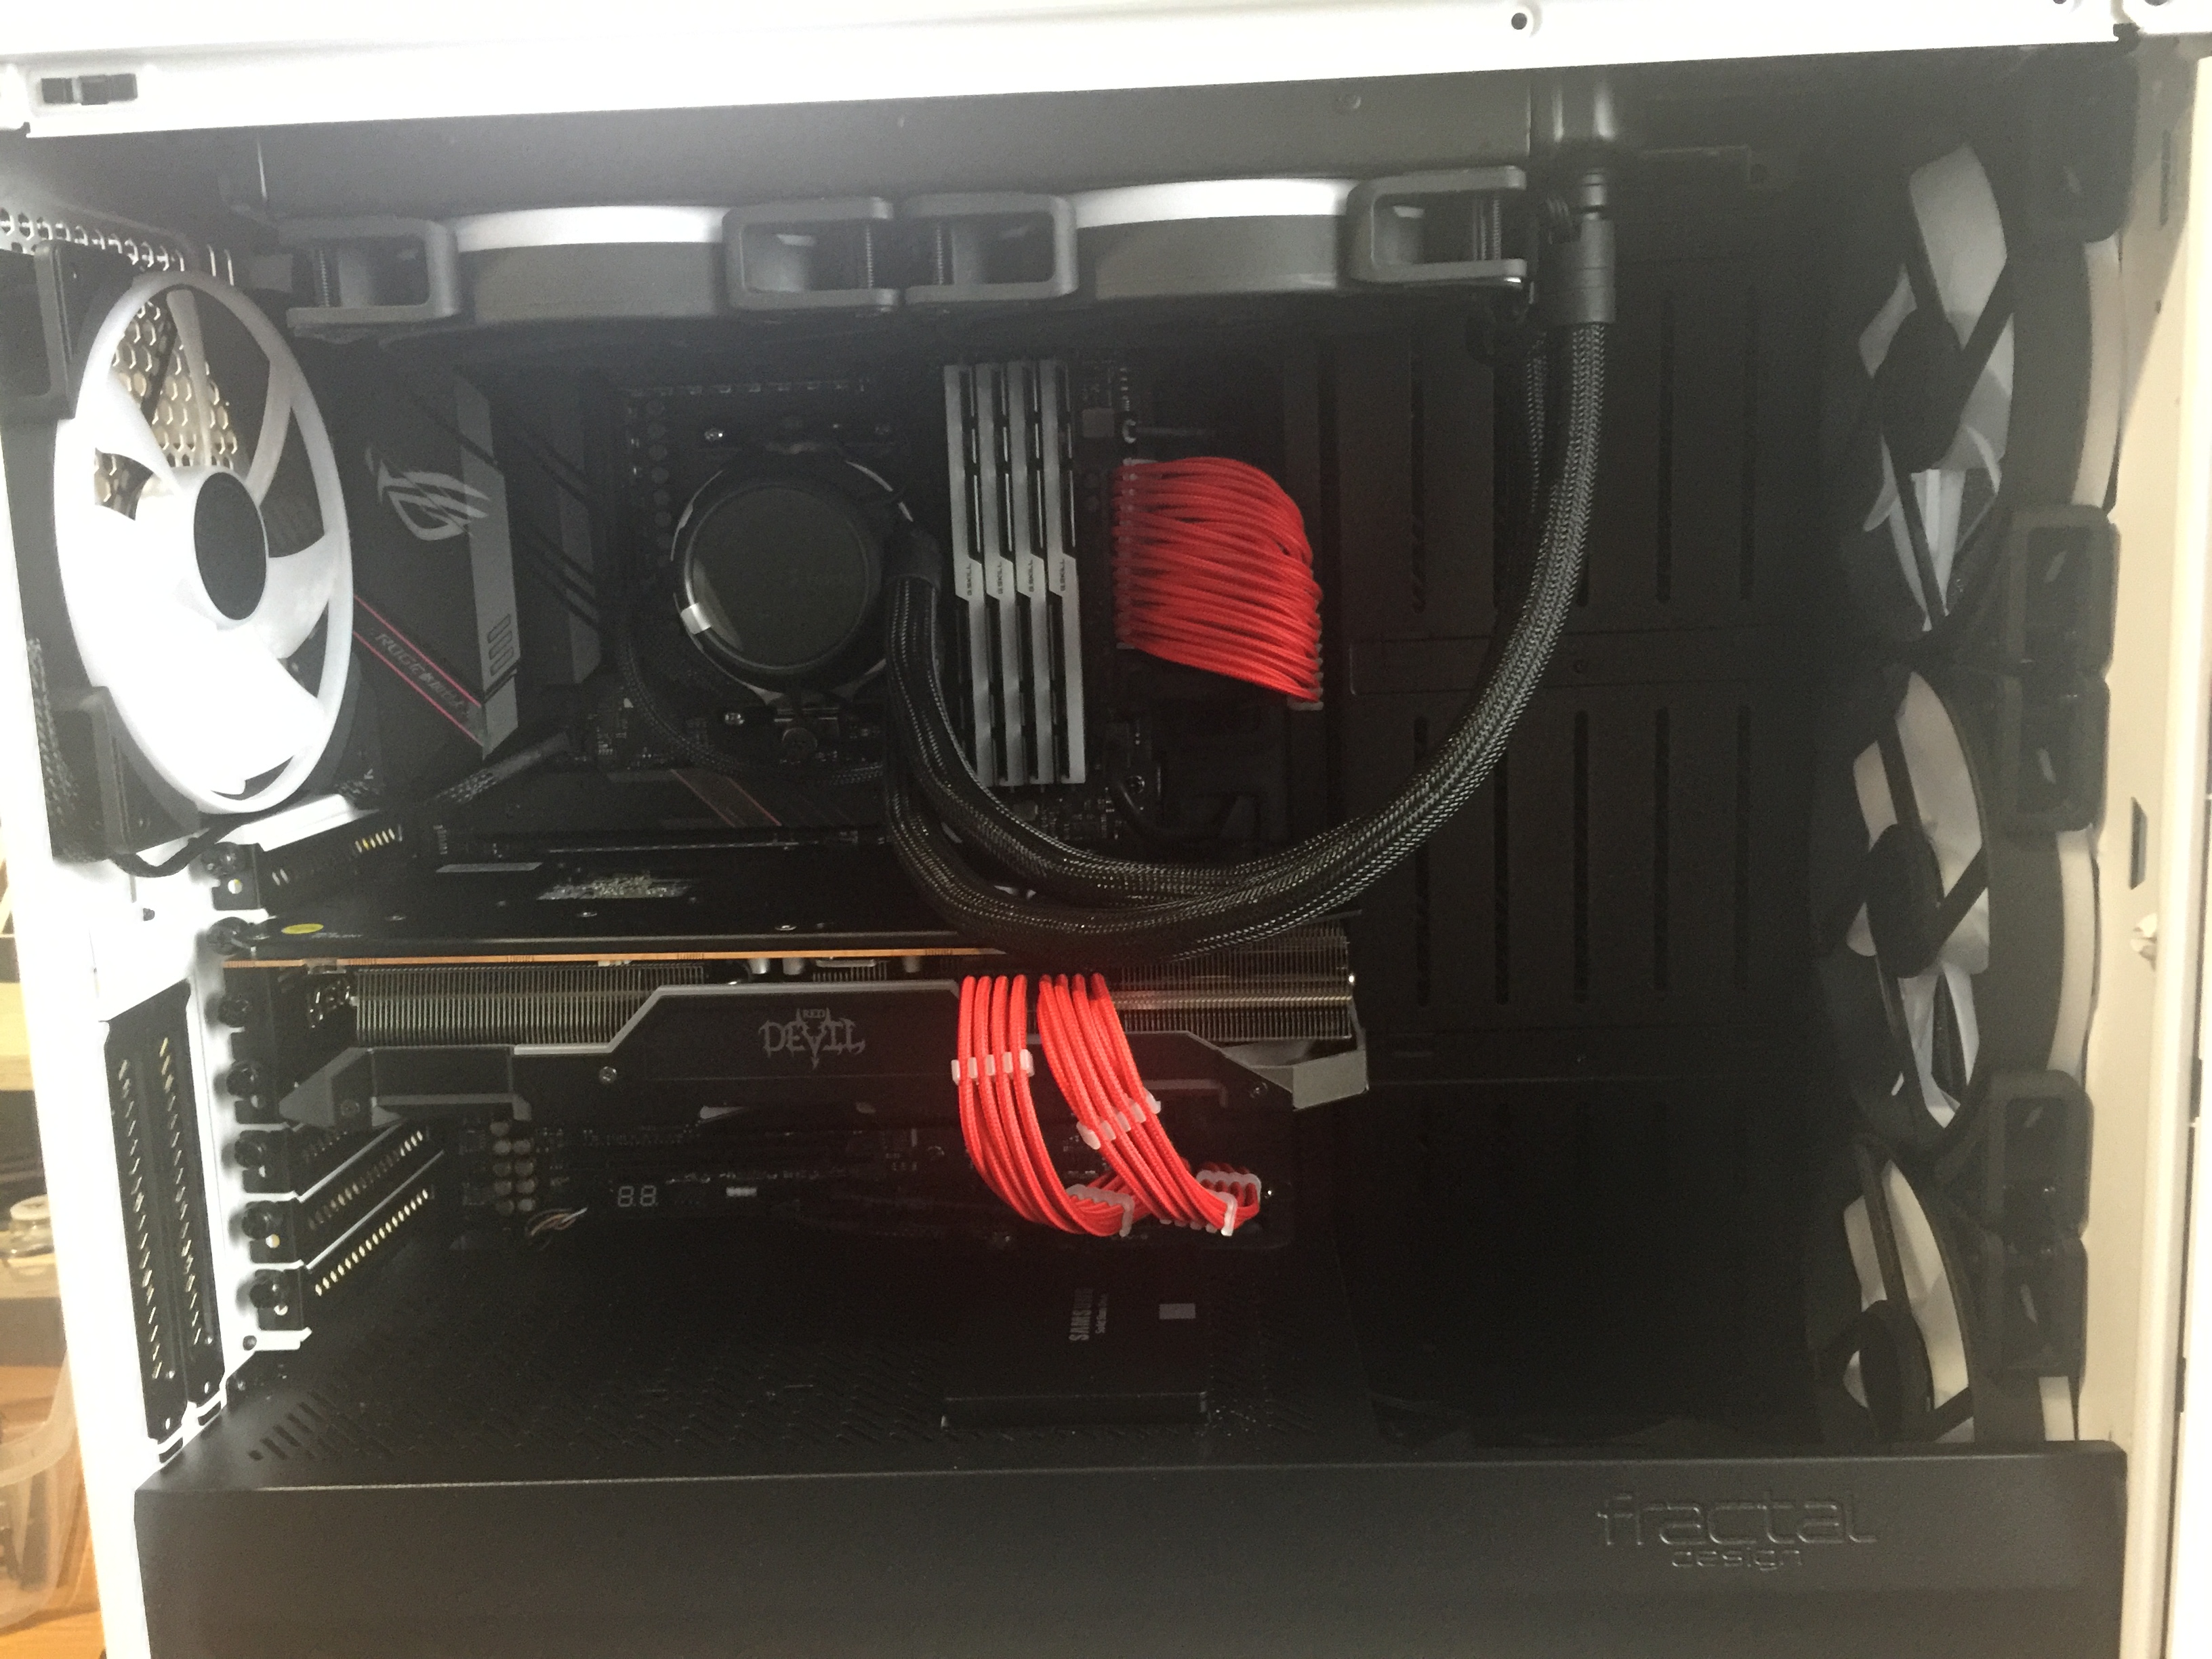 Red devil graphics card